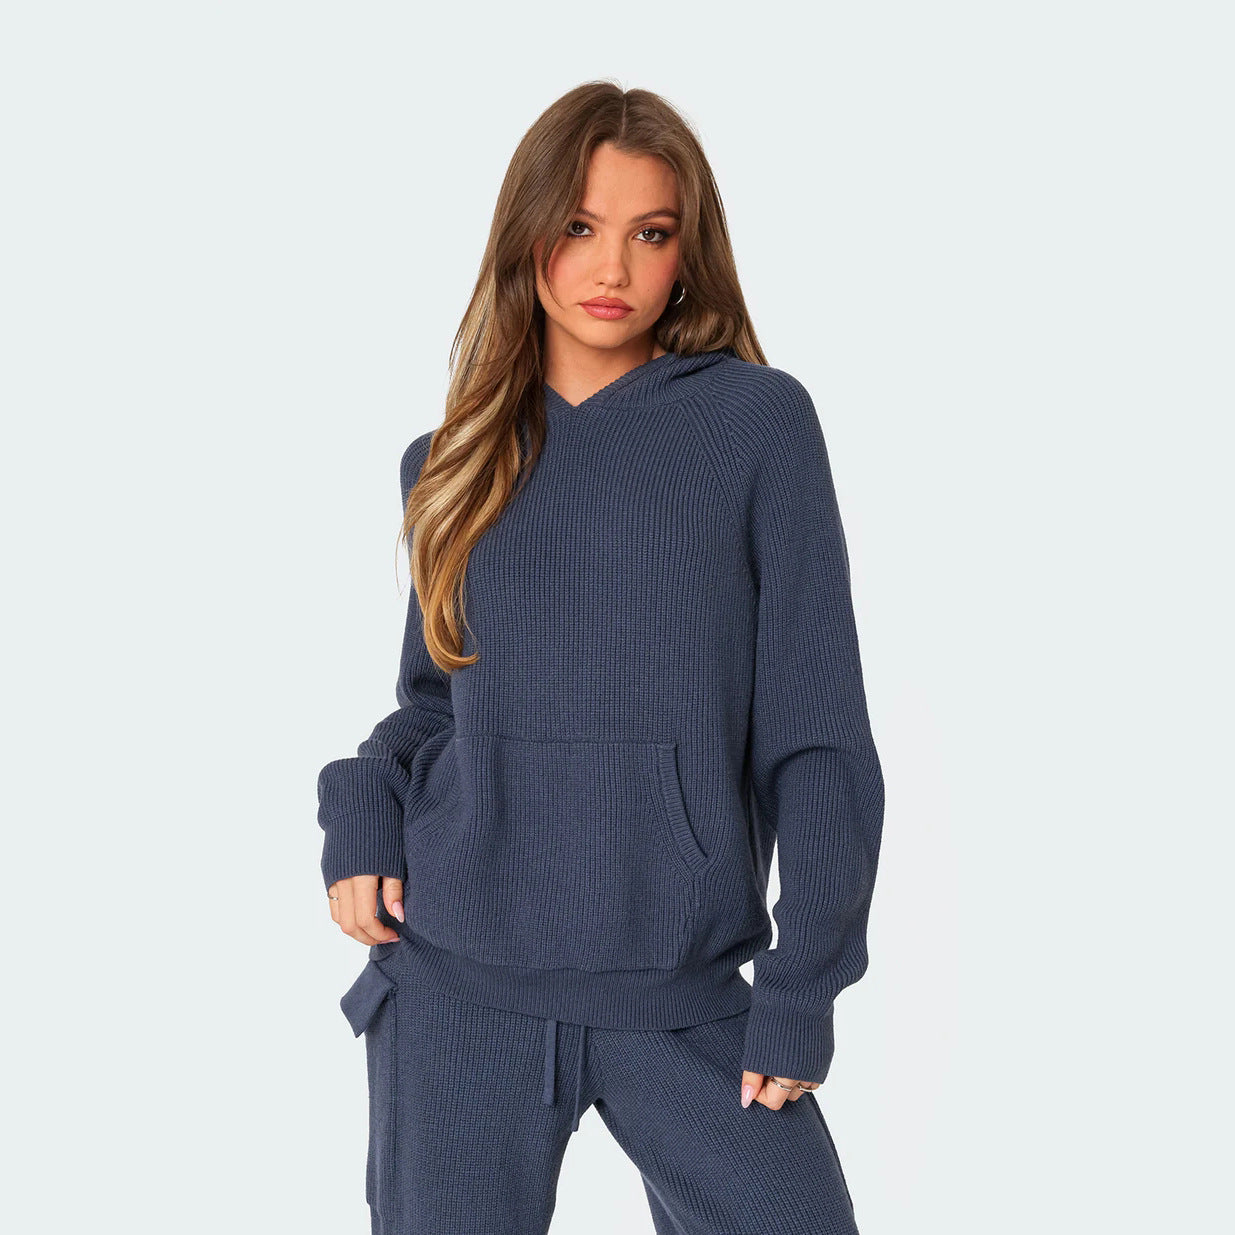 Hooded Sports And Leisure Sweaters Suit